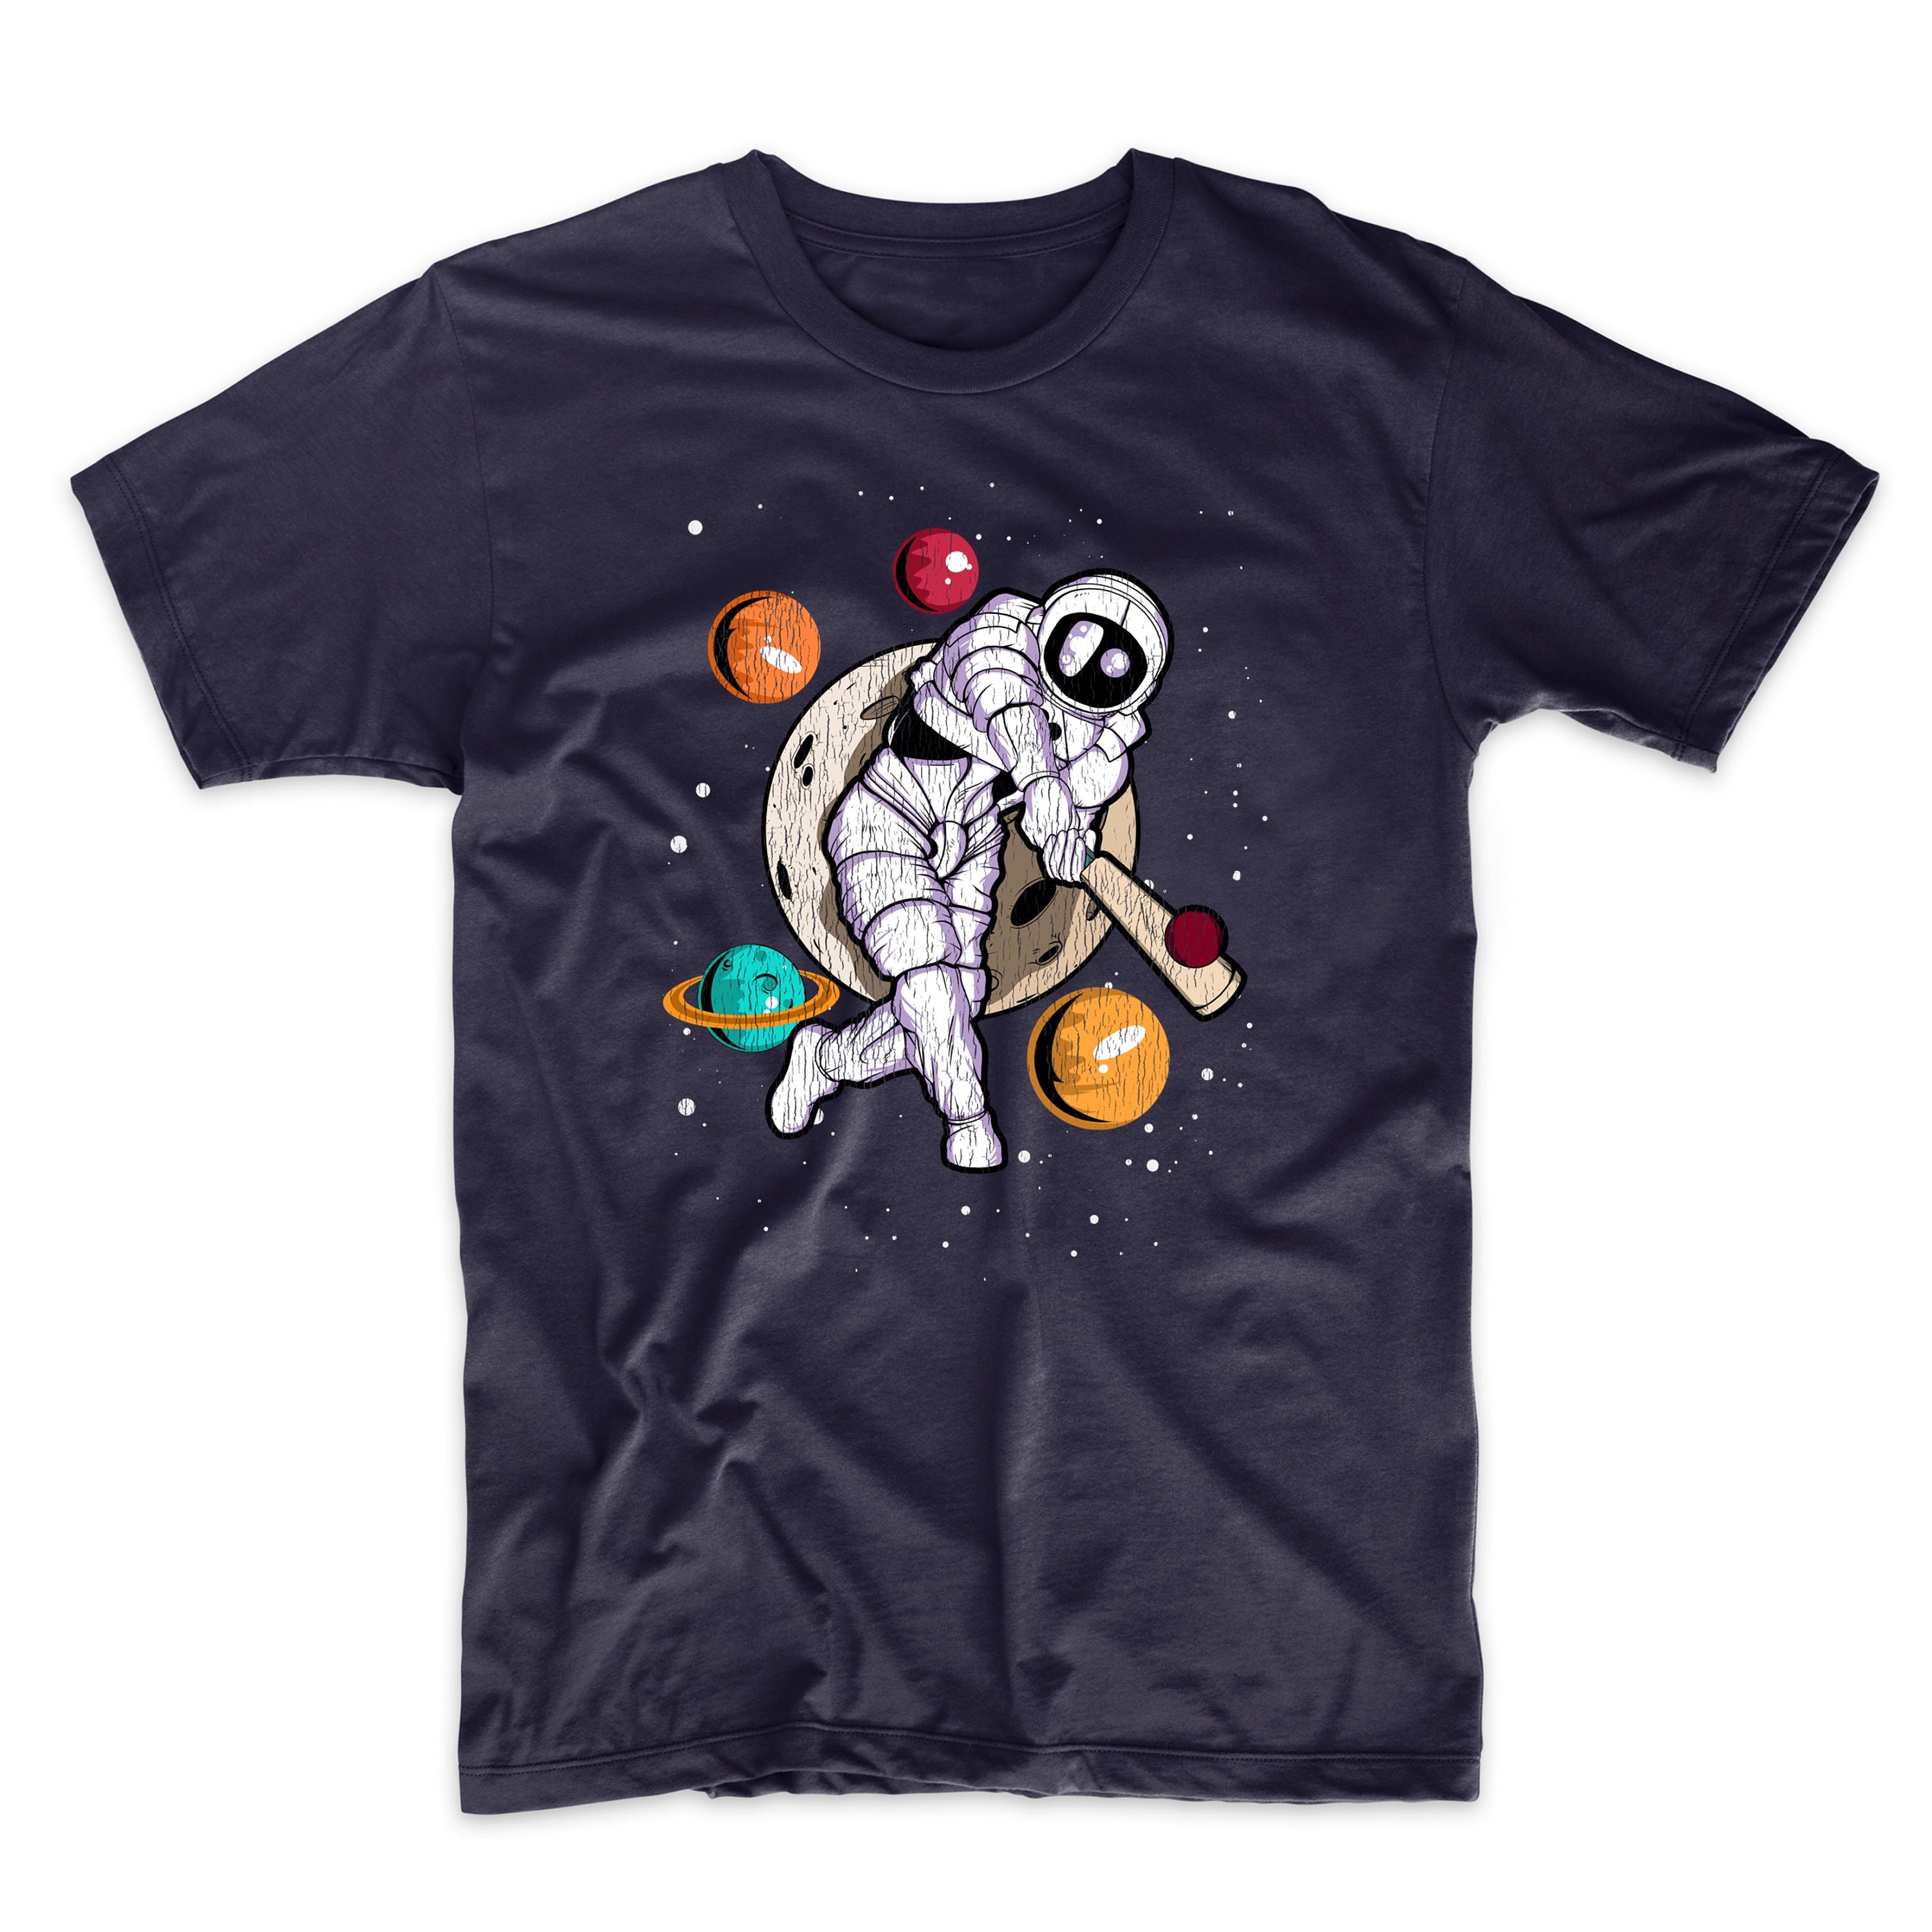 Discover Men's Cricket Shirt - Cricket Astronaut Outer Space Spaceman Distressed T-Shirt